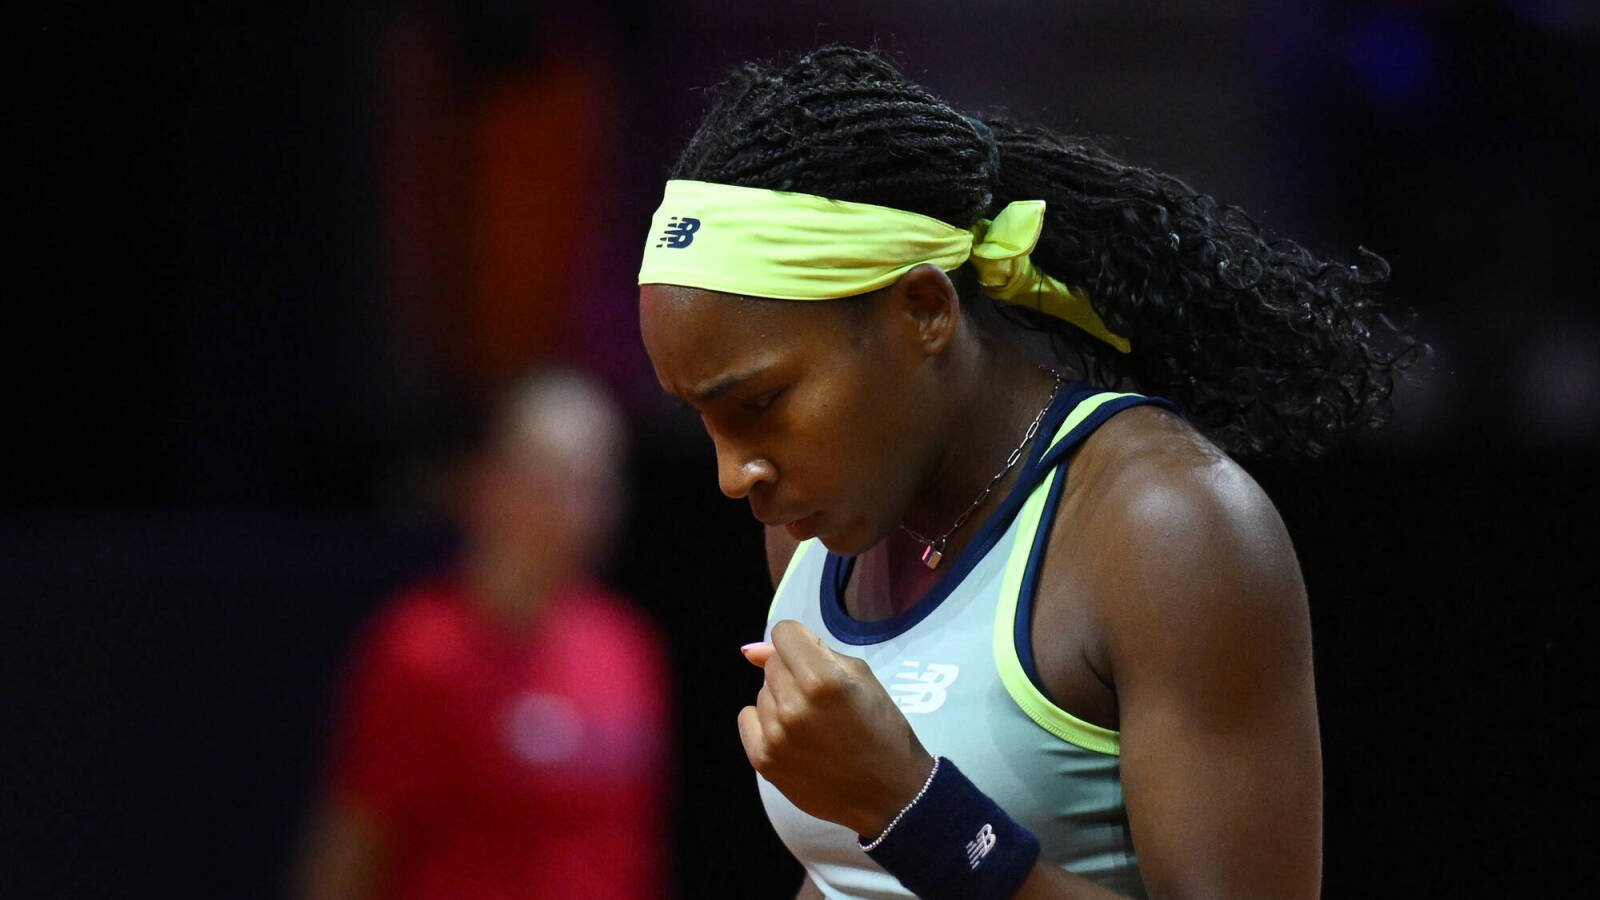 'I would love to play at the same time as Caitlin Clark,' American WTA prodigy Coco Gauff expressed desire to guard against WNBA number 1 Caitlin Clark in another lifetime